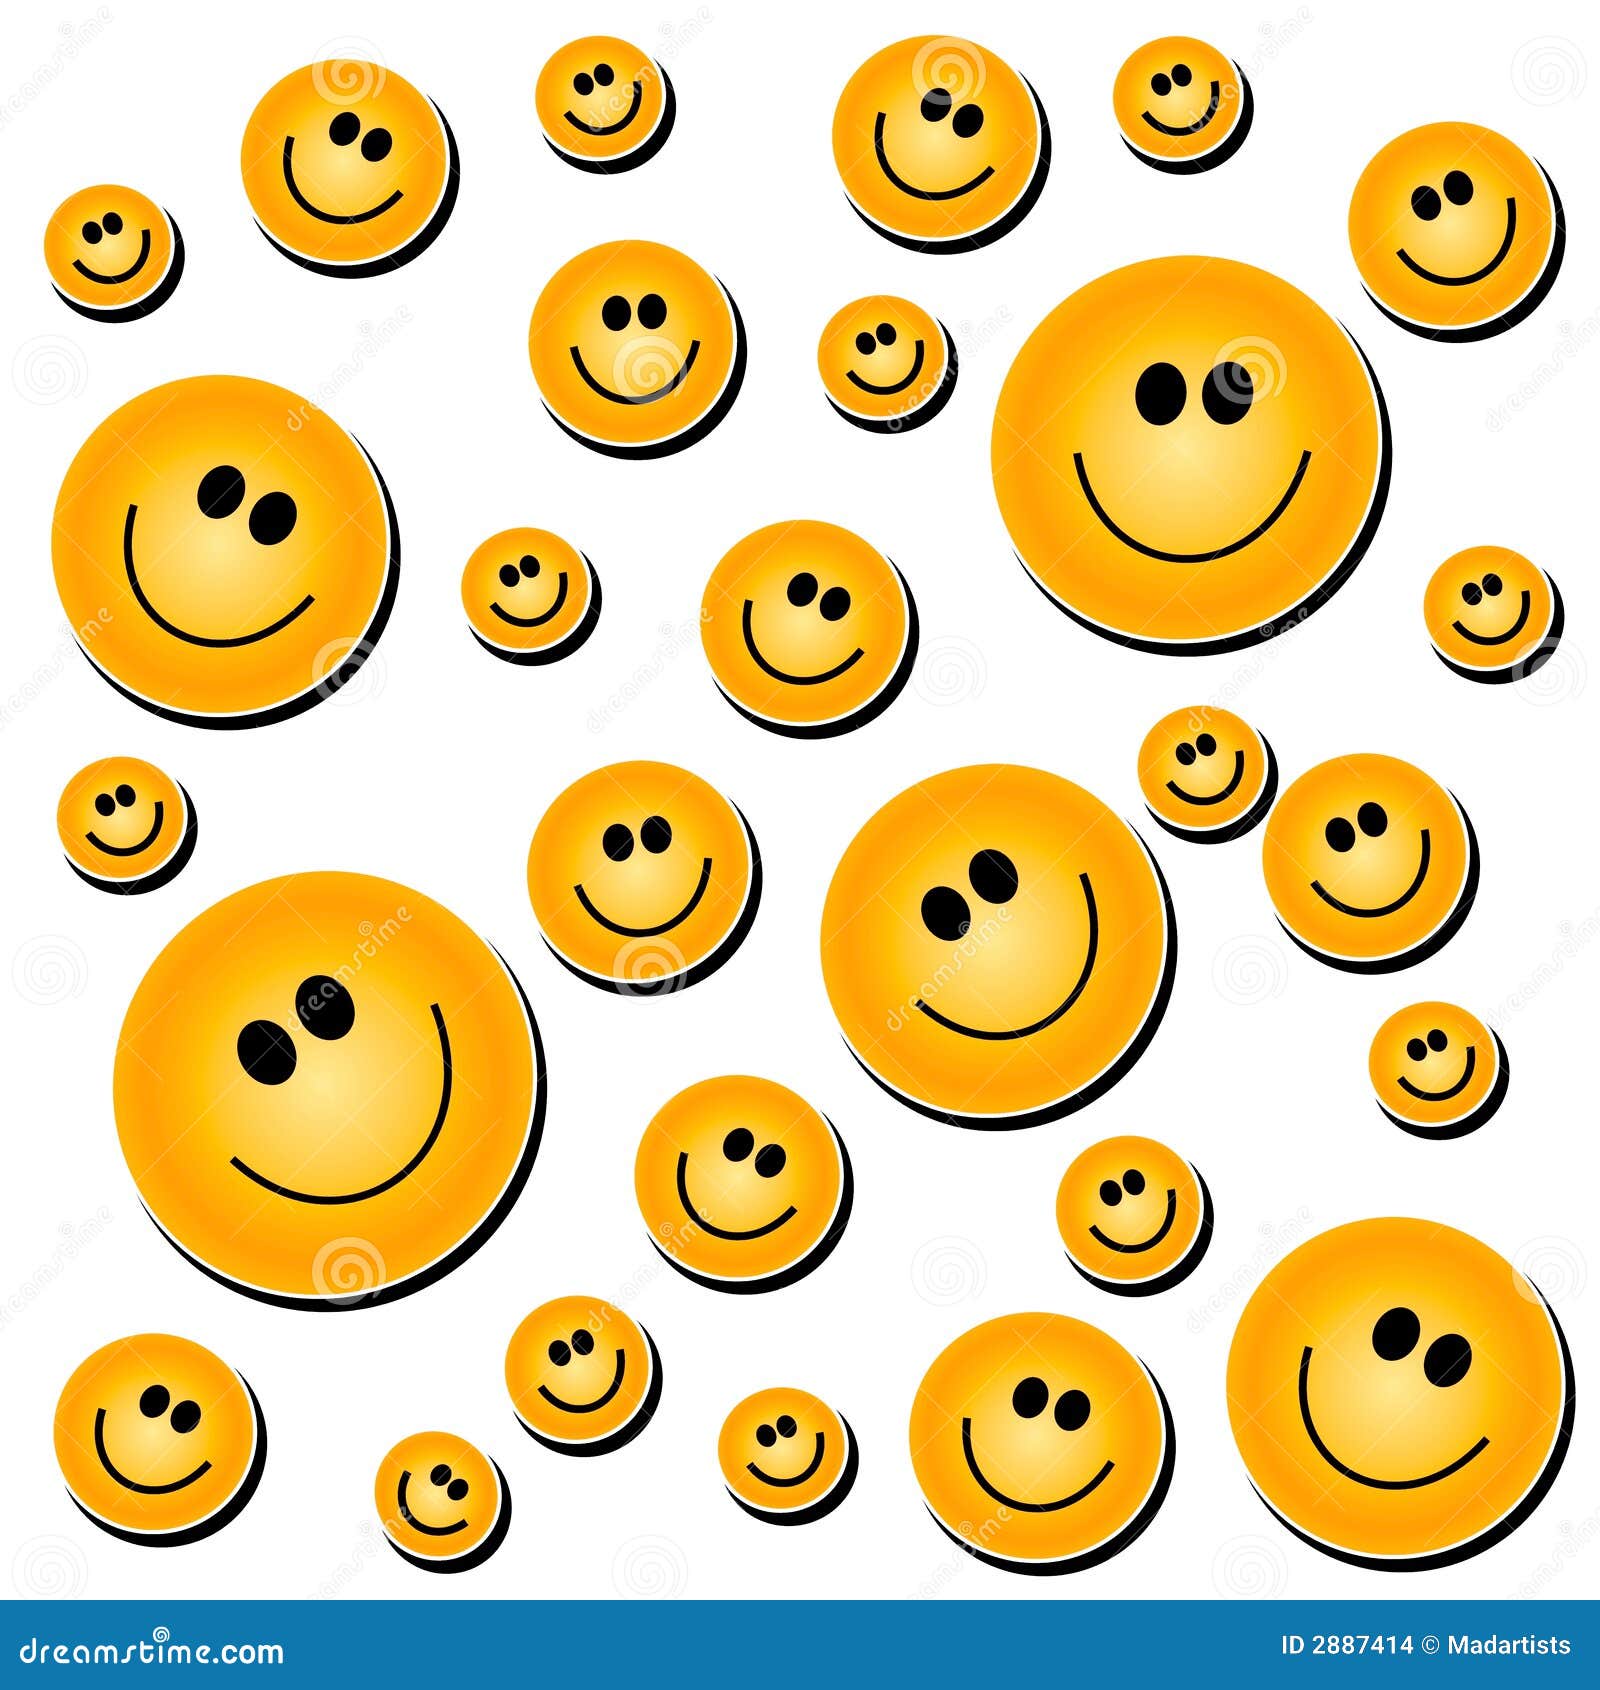 smiley face background white